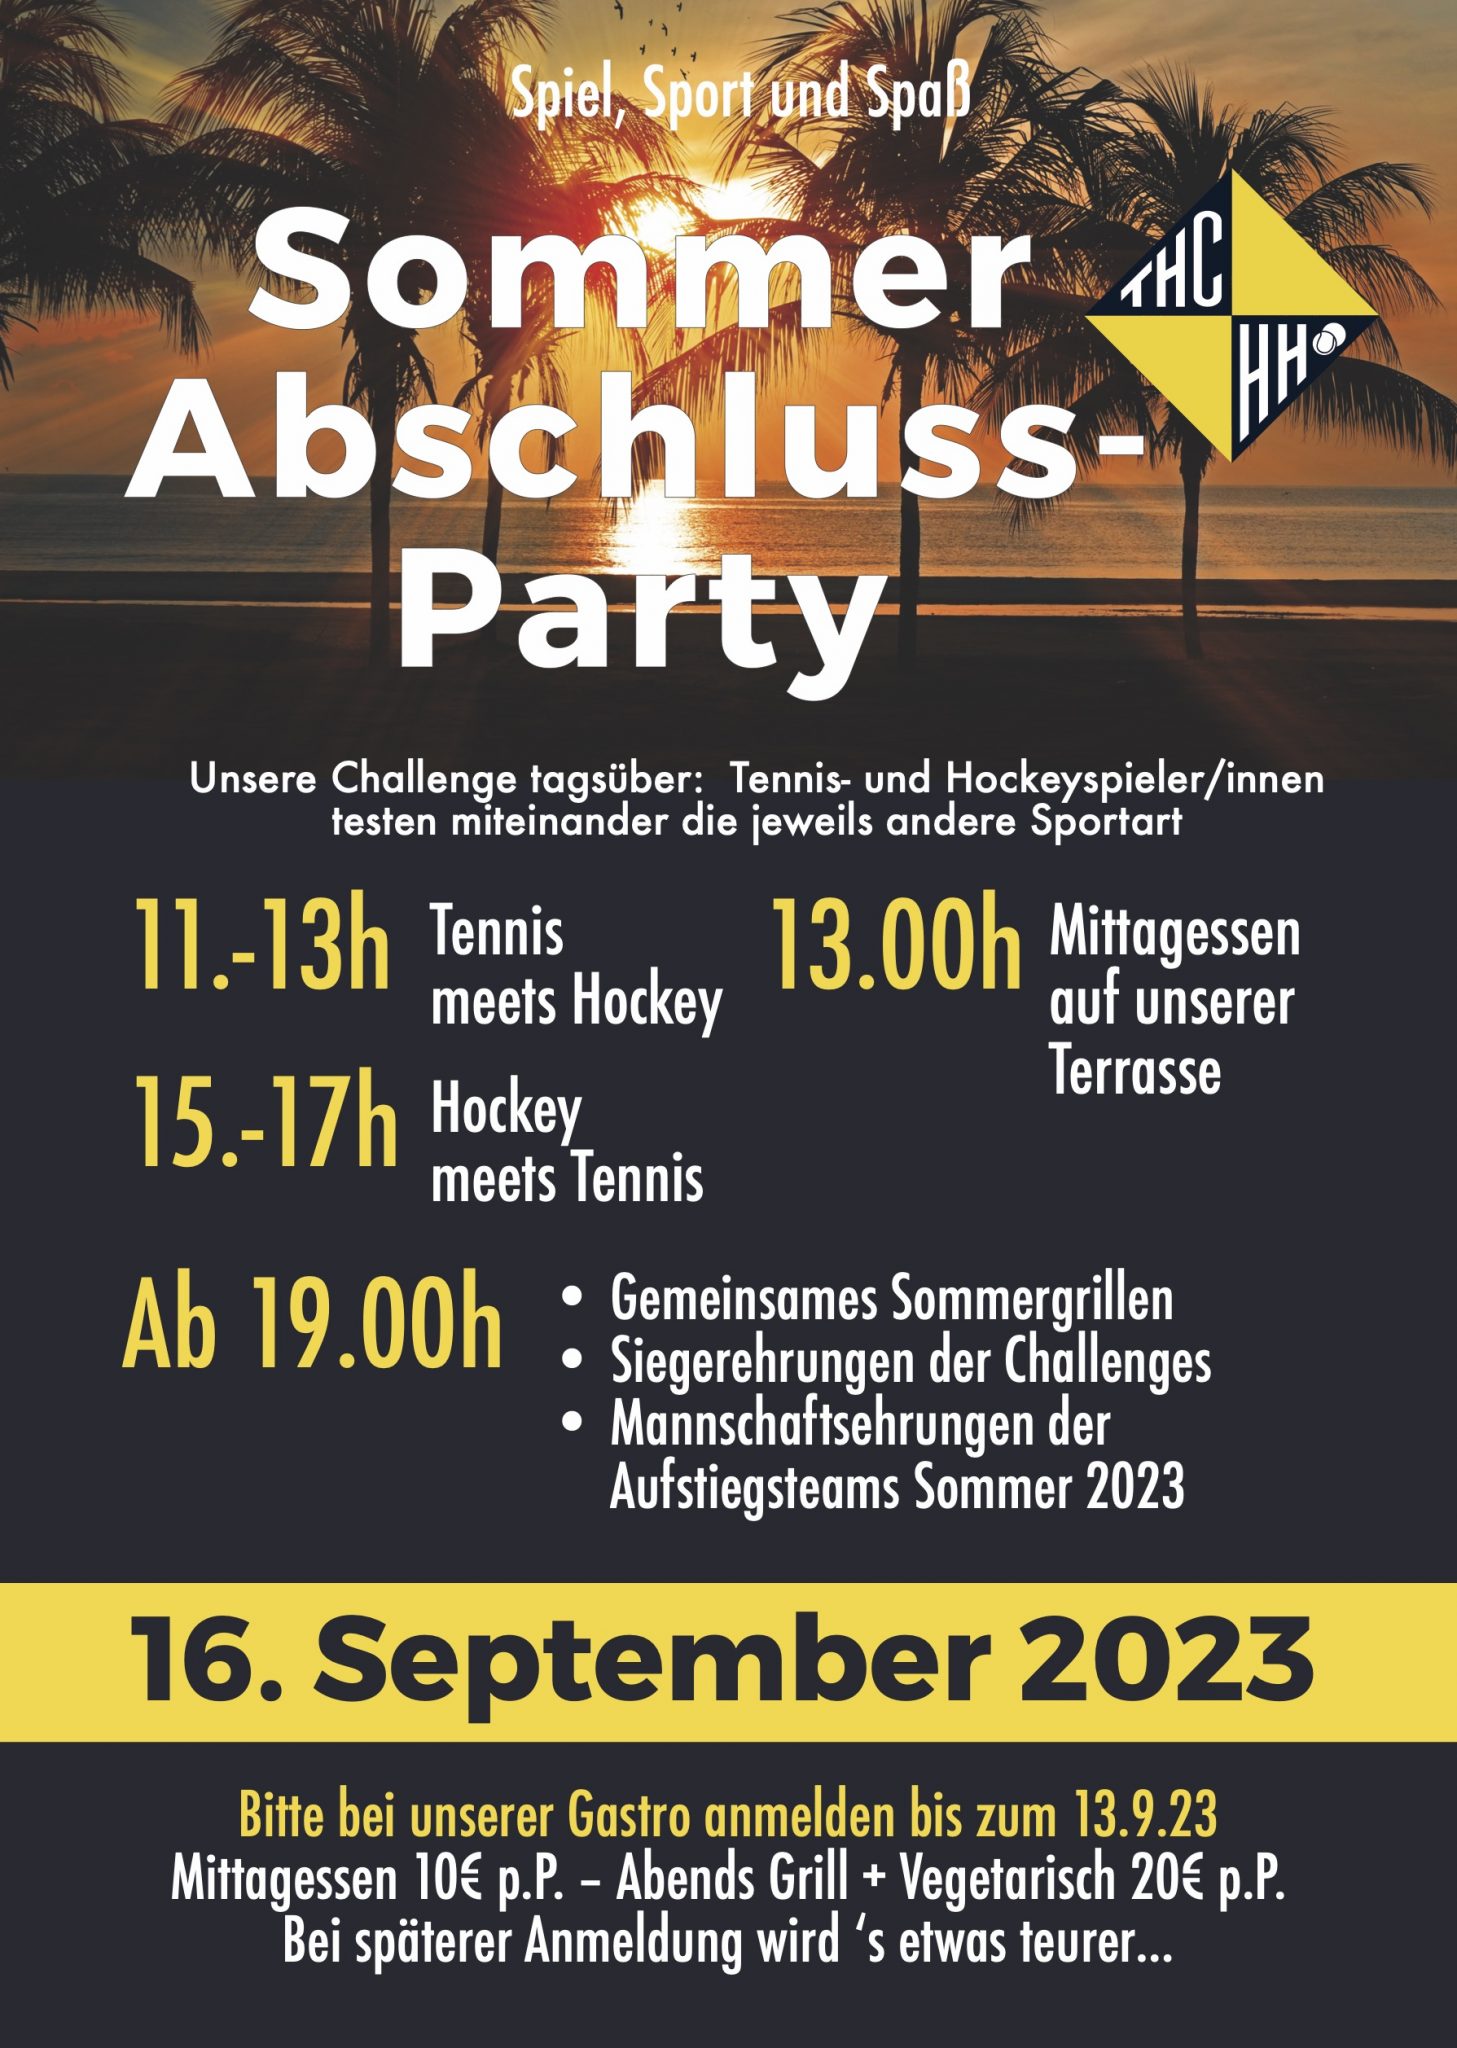 Sommer Abschluss Party 2023 scaled.jpg?fp=0.49354886549014 0